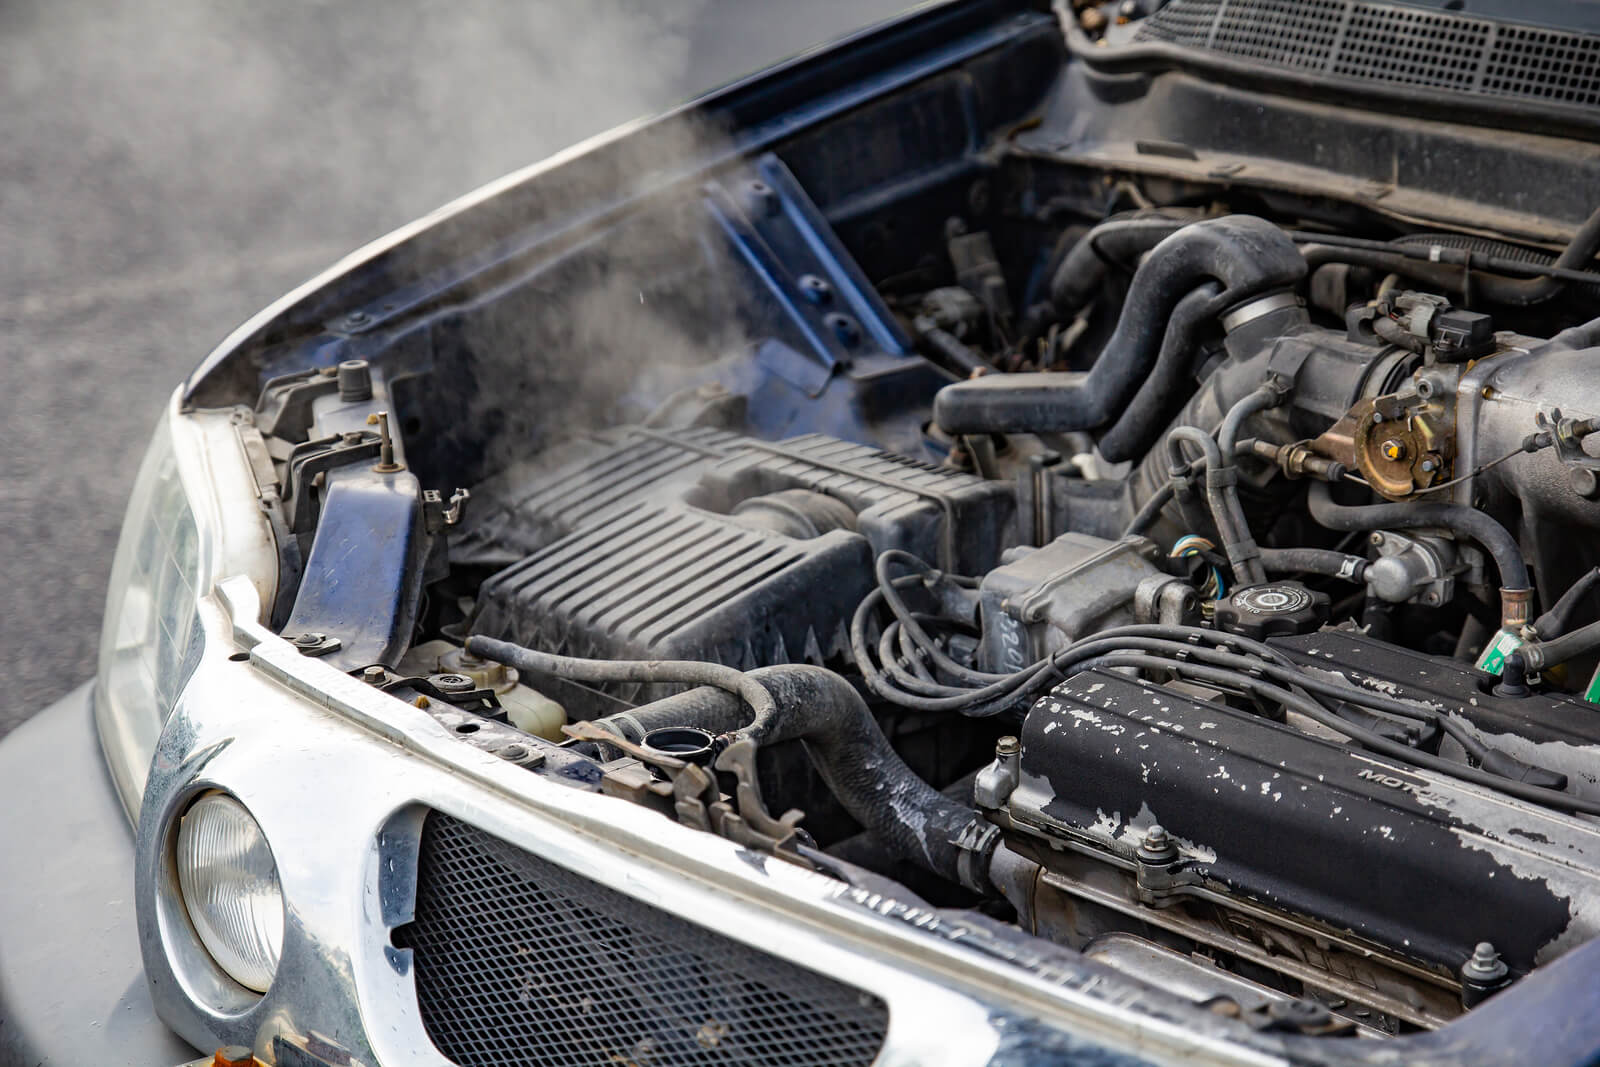 Why Is My Car Overheating? - Ideal Automotive